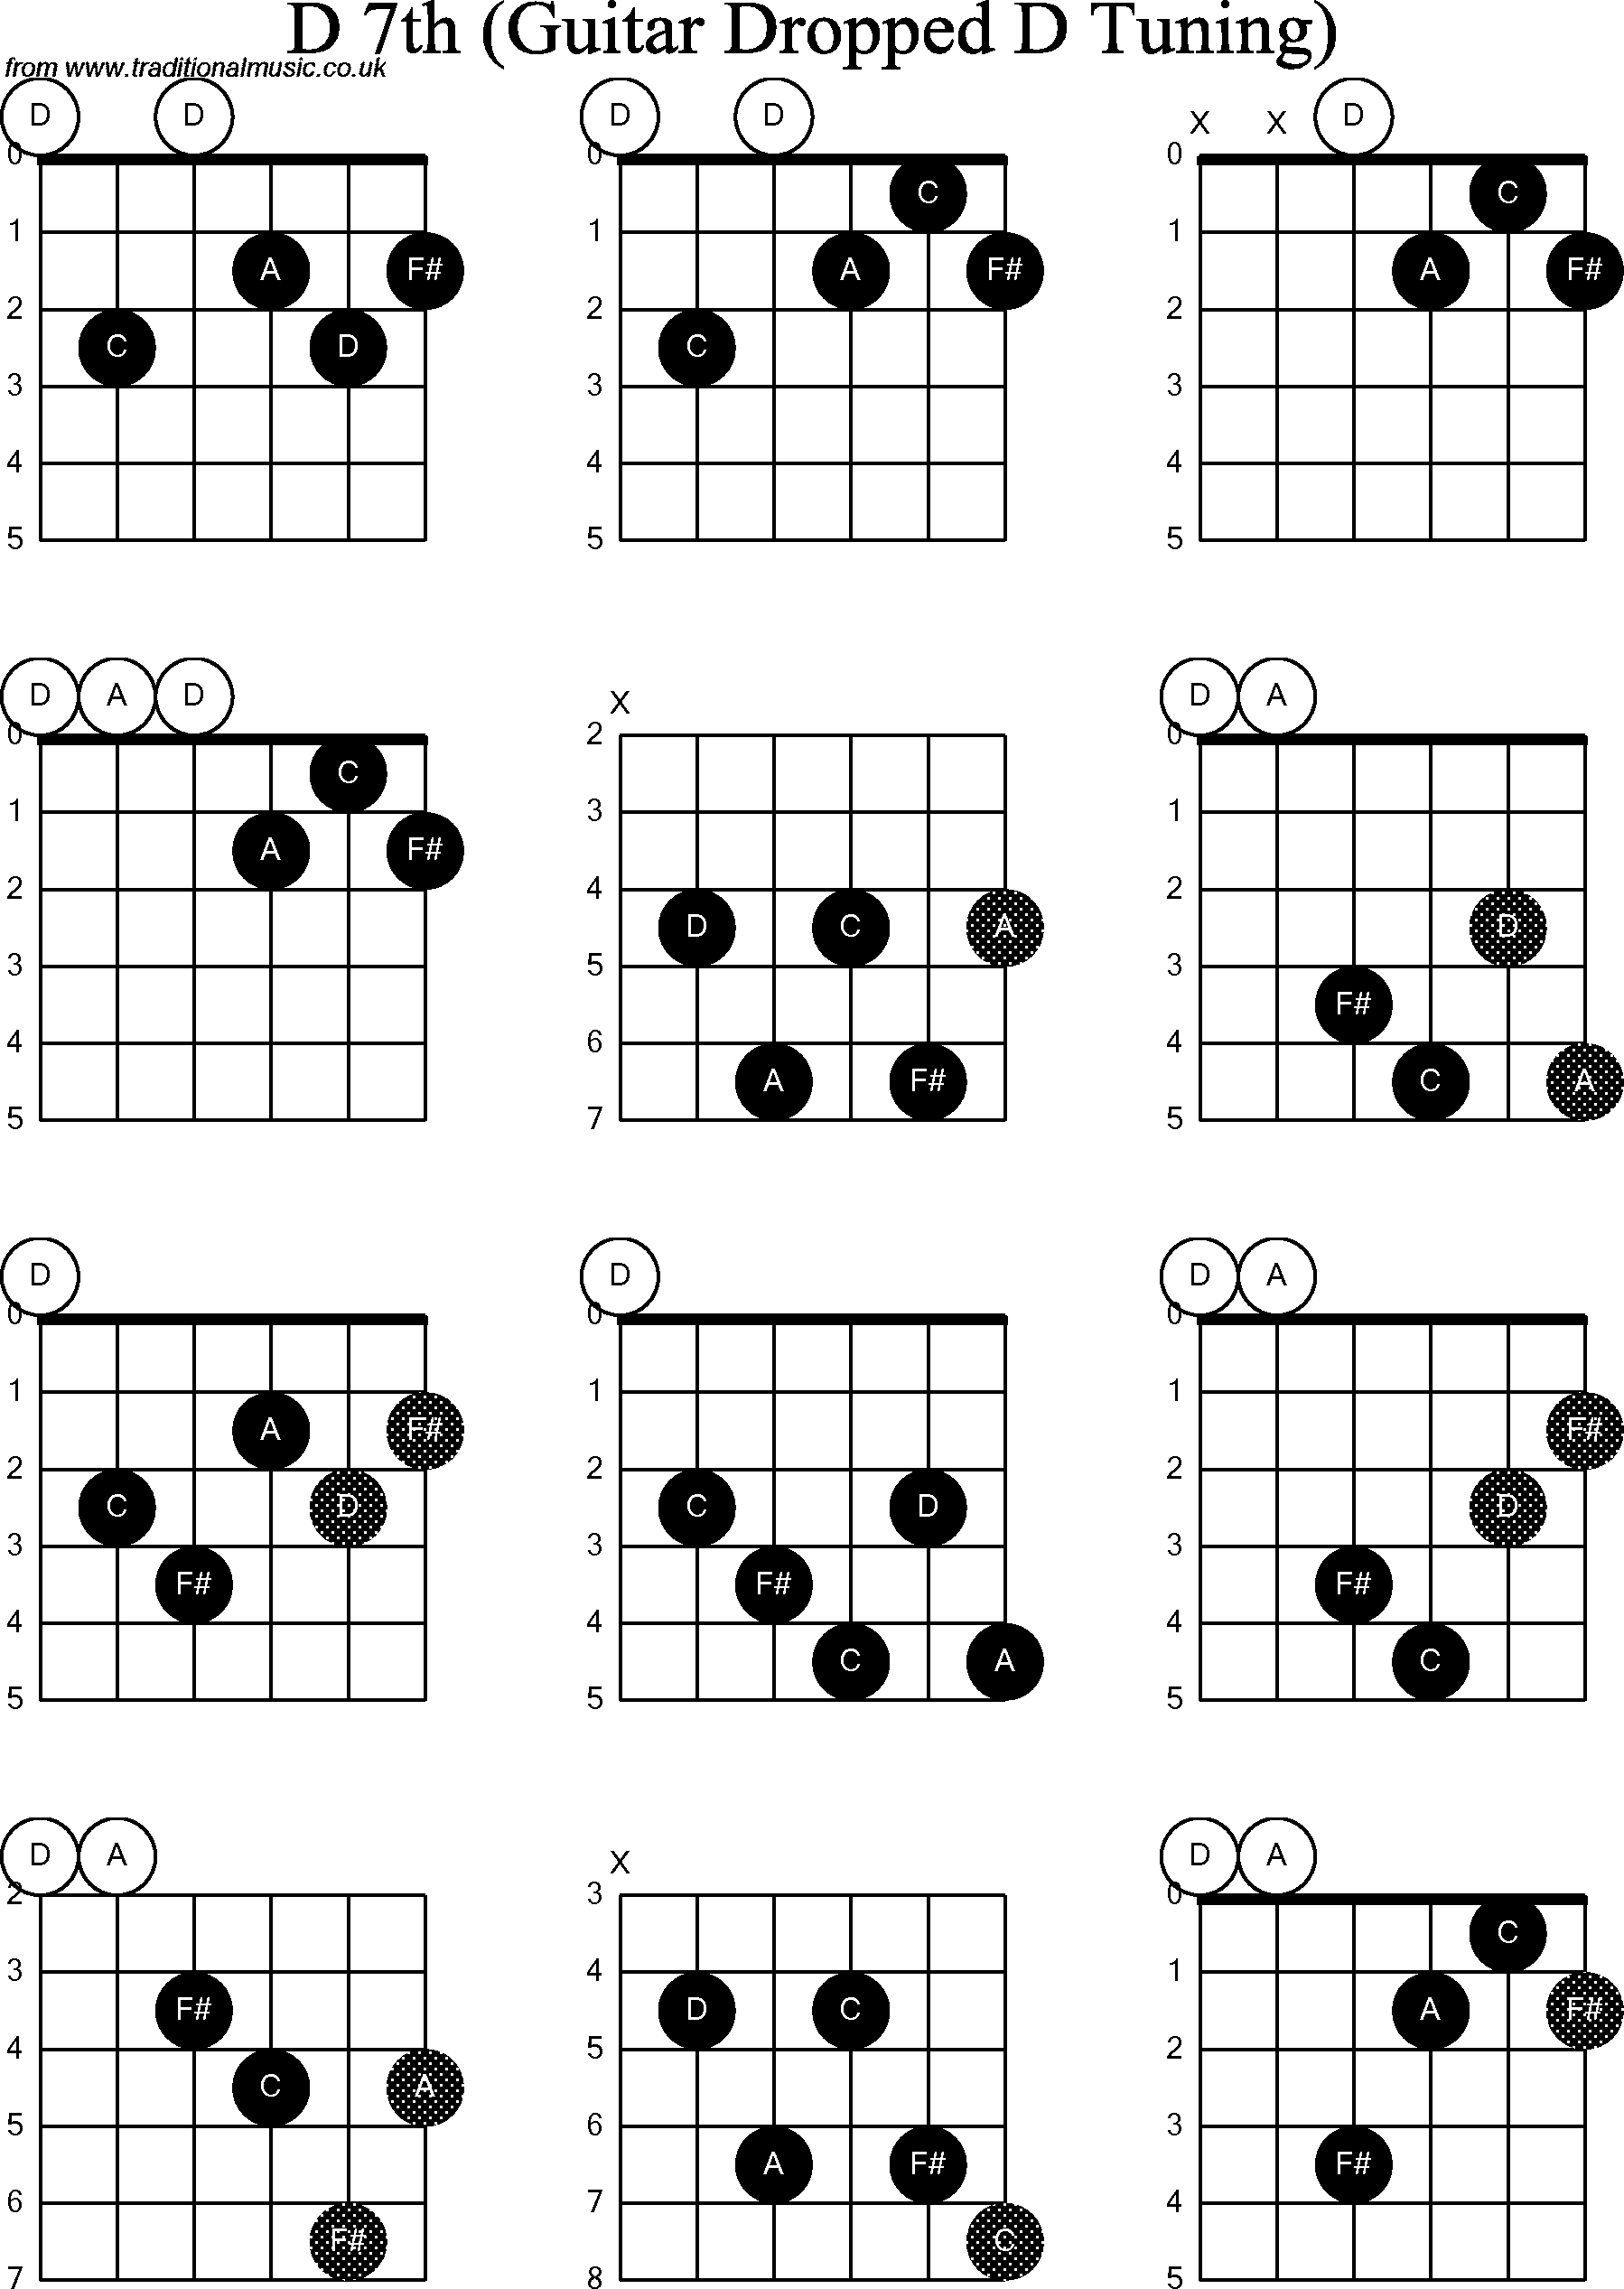 Chord diagrams for dropped D Guitar(DADGBE), D7th